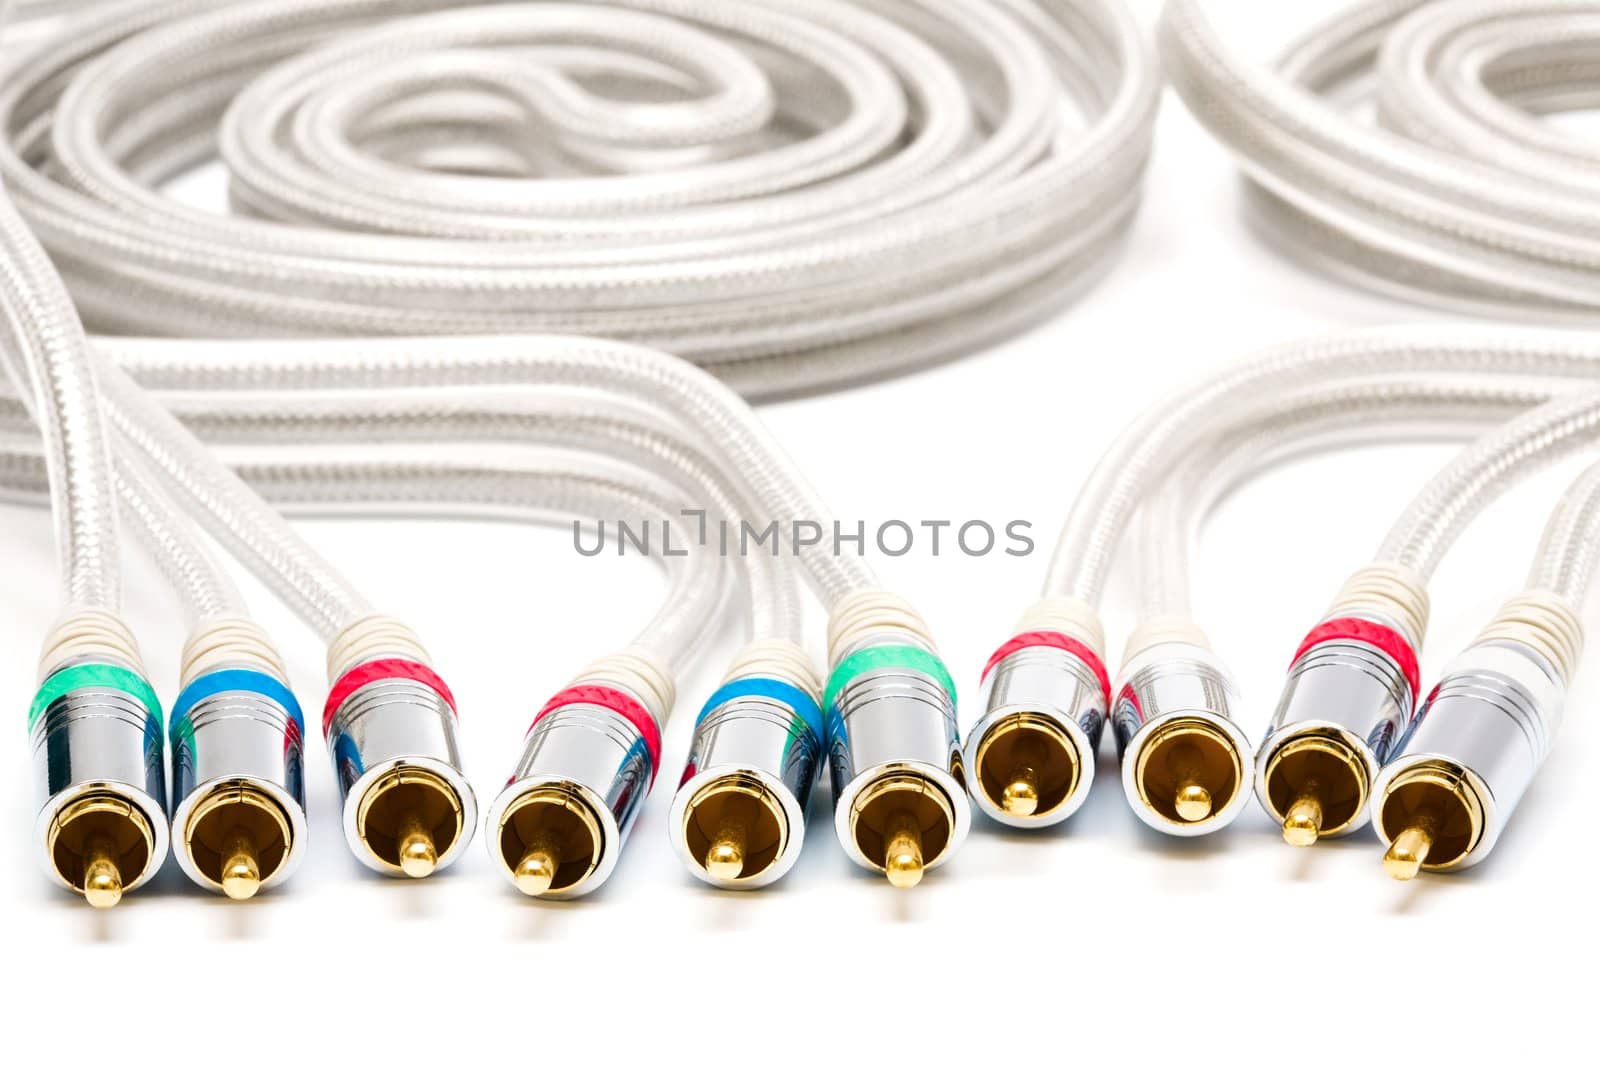 component video and audio cable with a gold covering